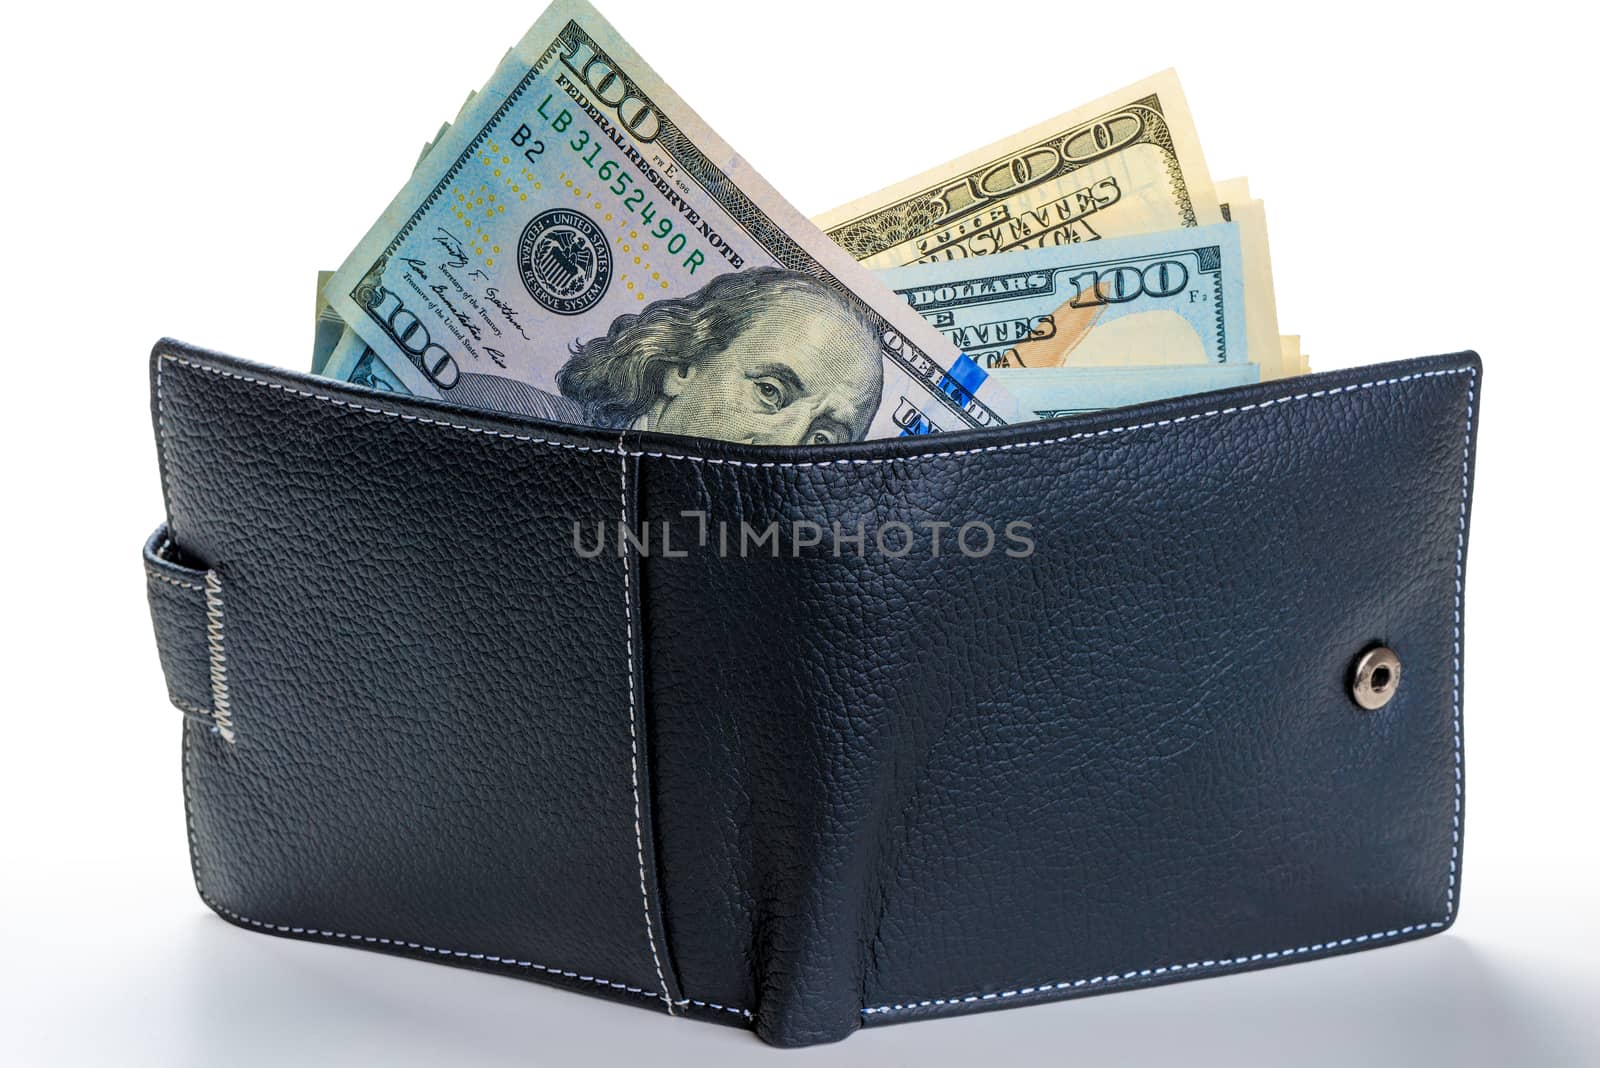 American dollars sticking out of a leather wallet full of money